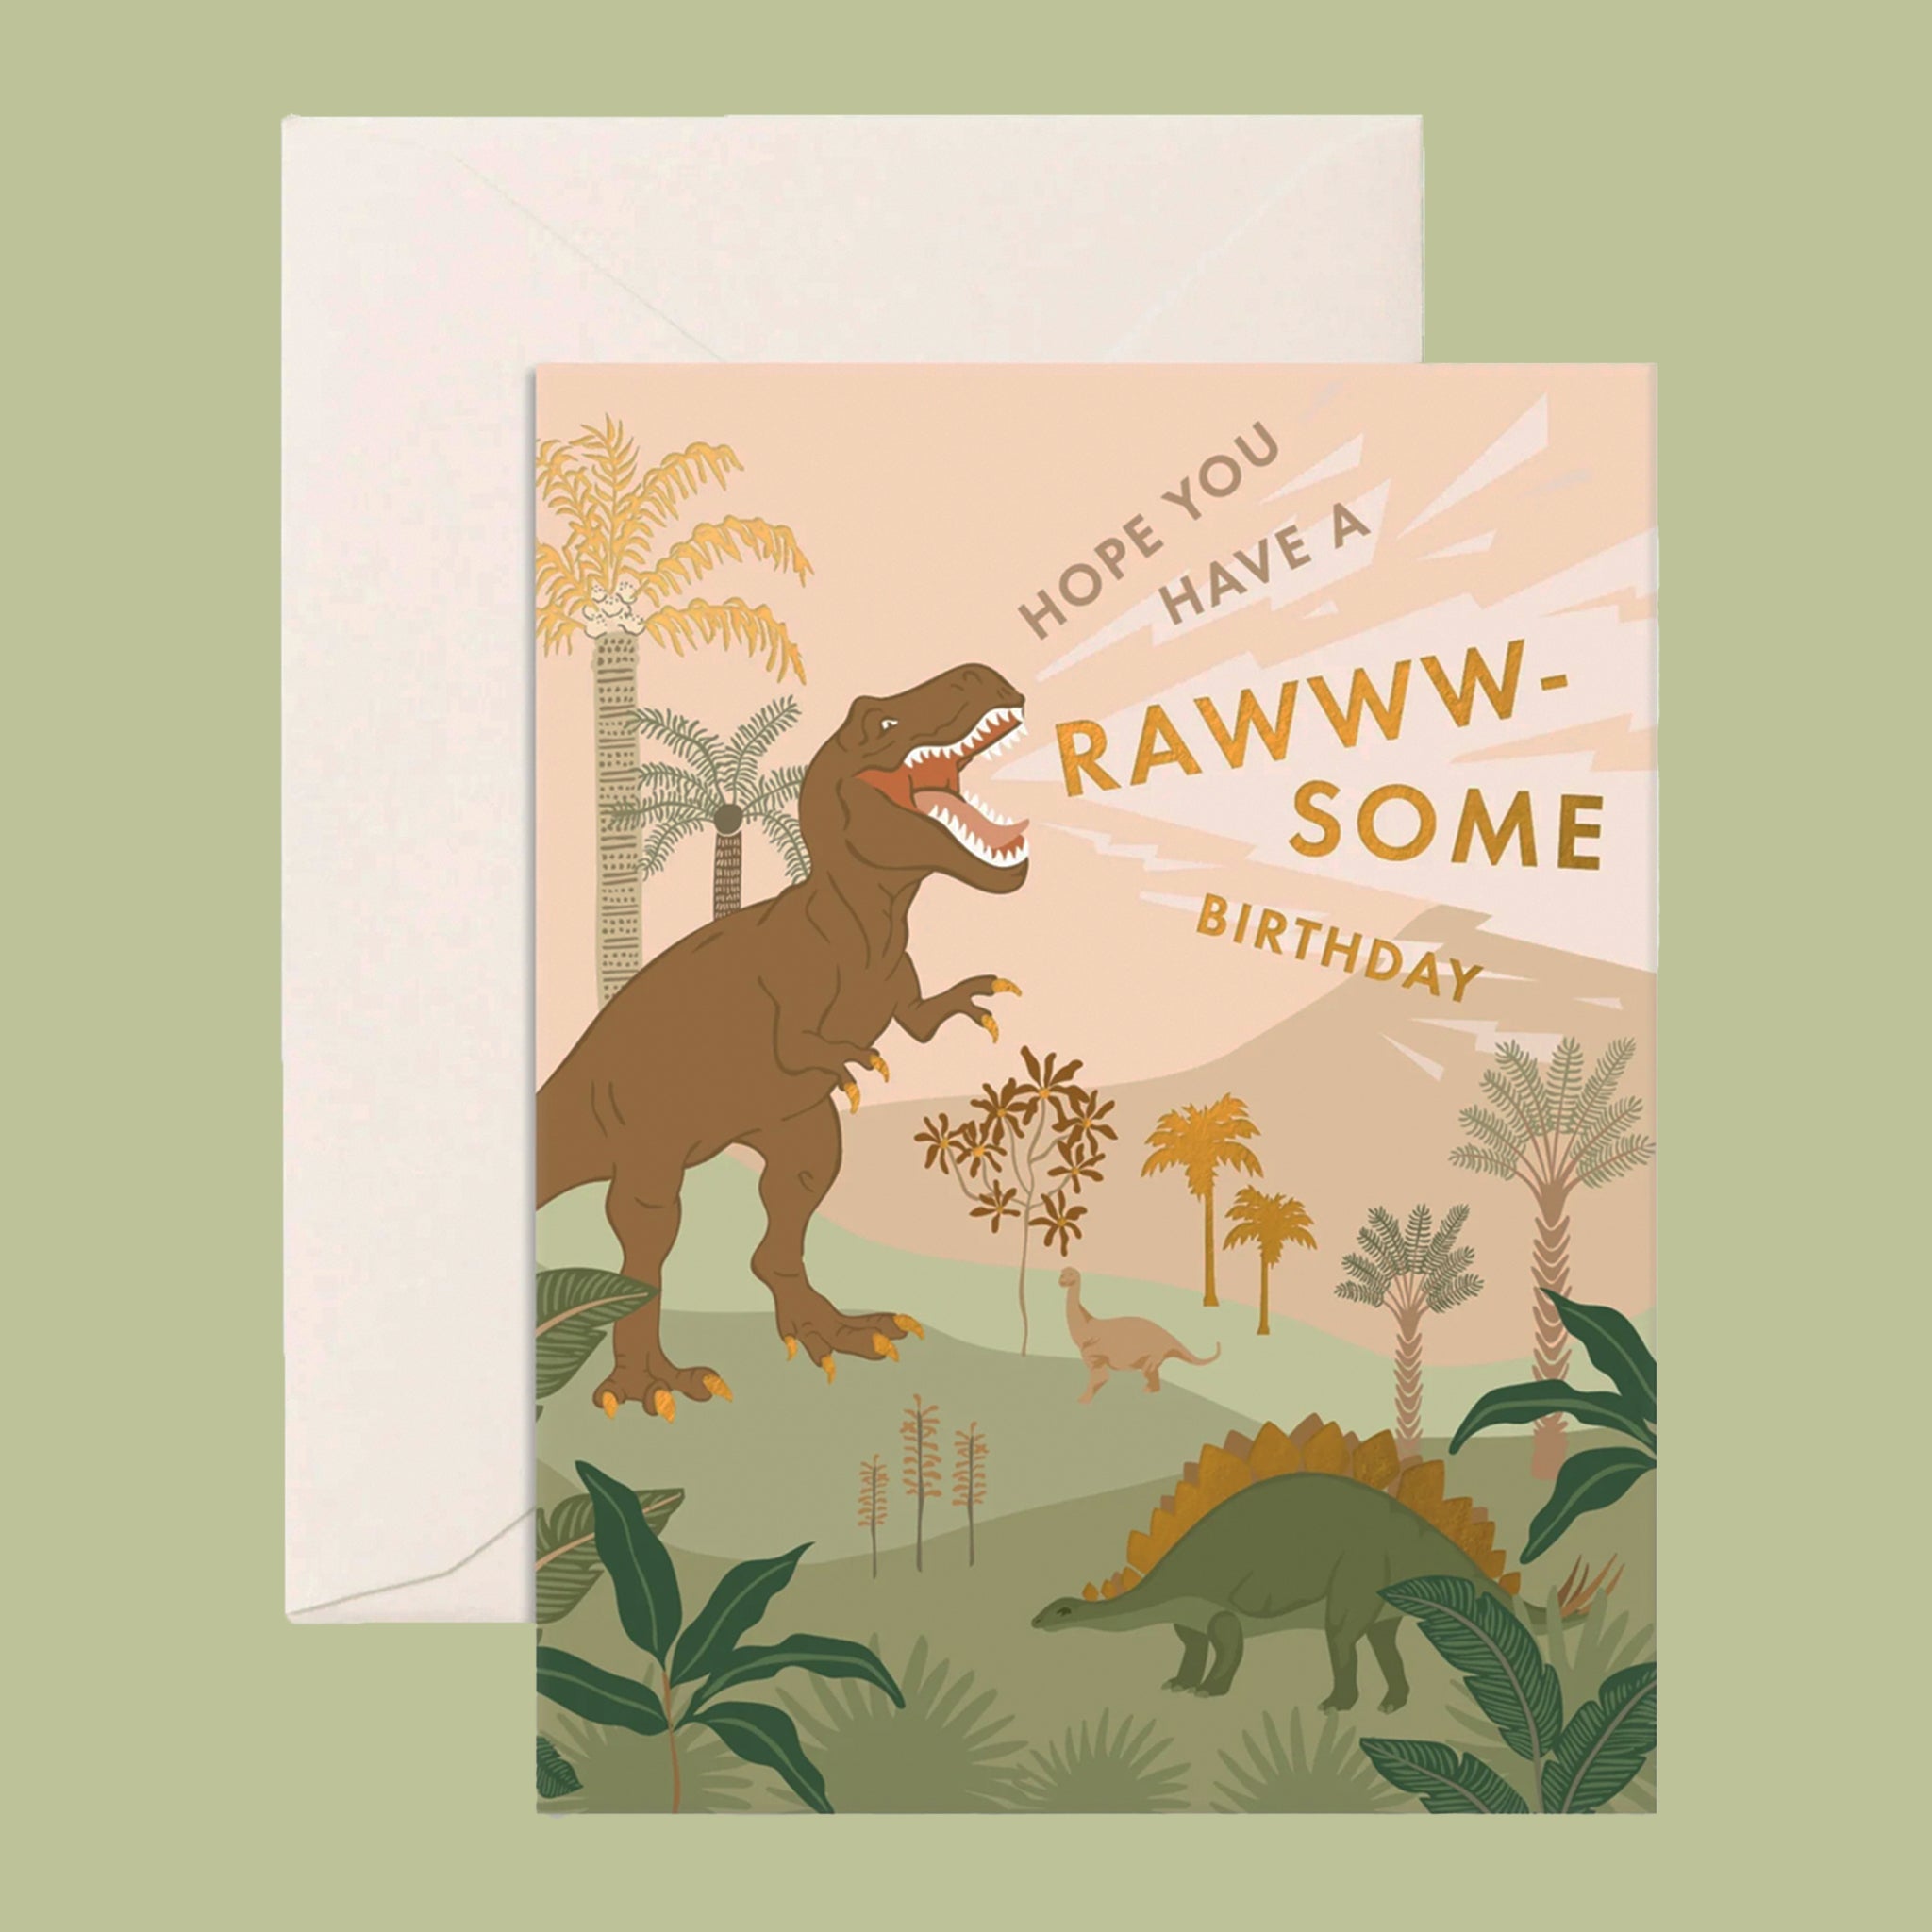 On a green background is a birthday card with a graphic of dinosaurs in a tropical landscape with gold foiled text that reads, "Hope You Have A Rawww-Some Birthday".